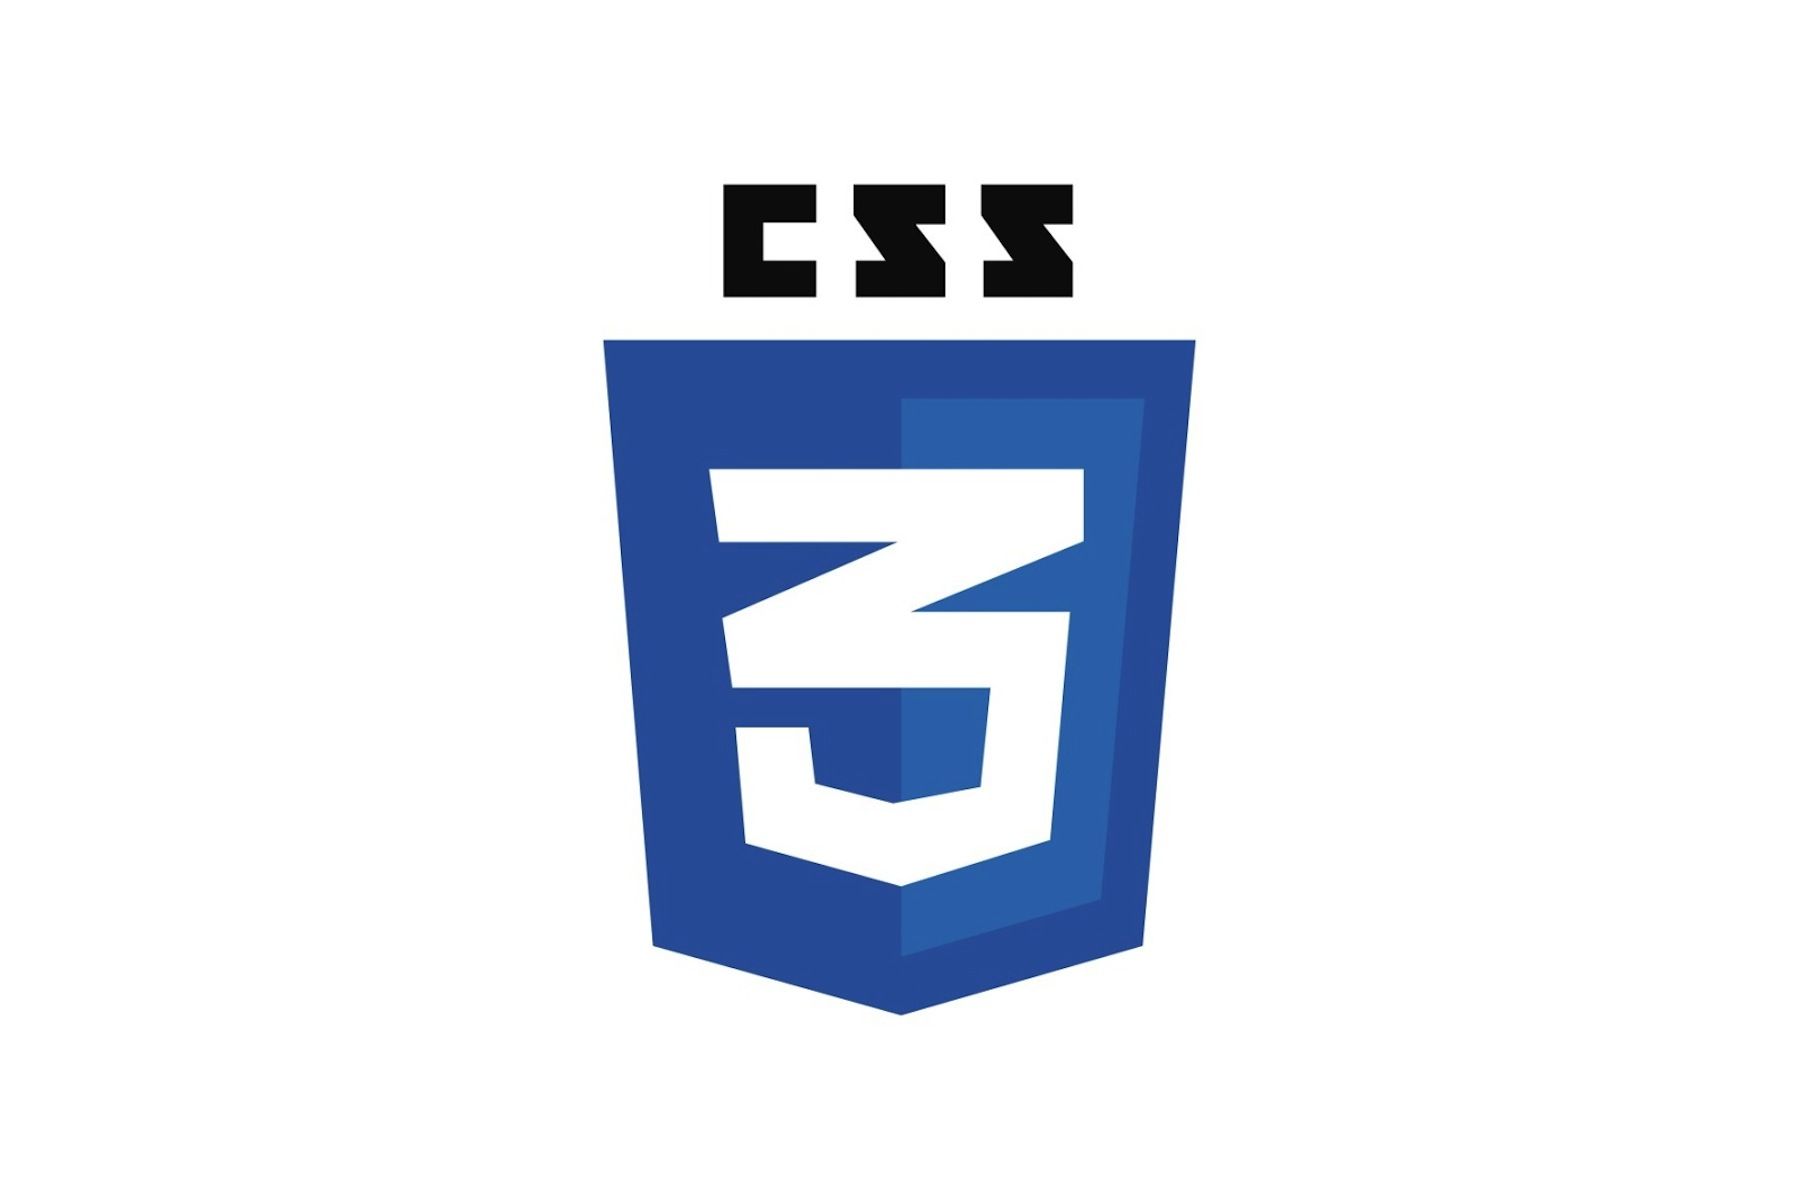 This is CSS image